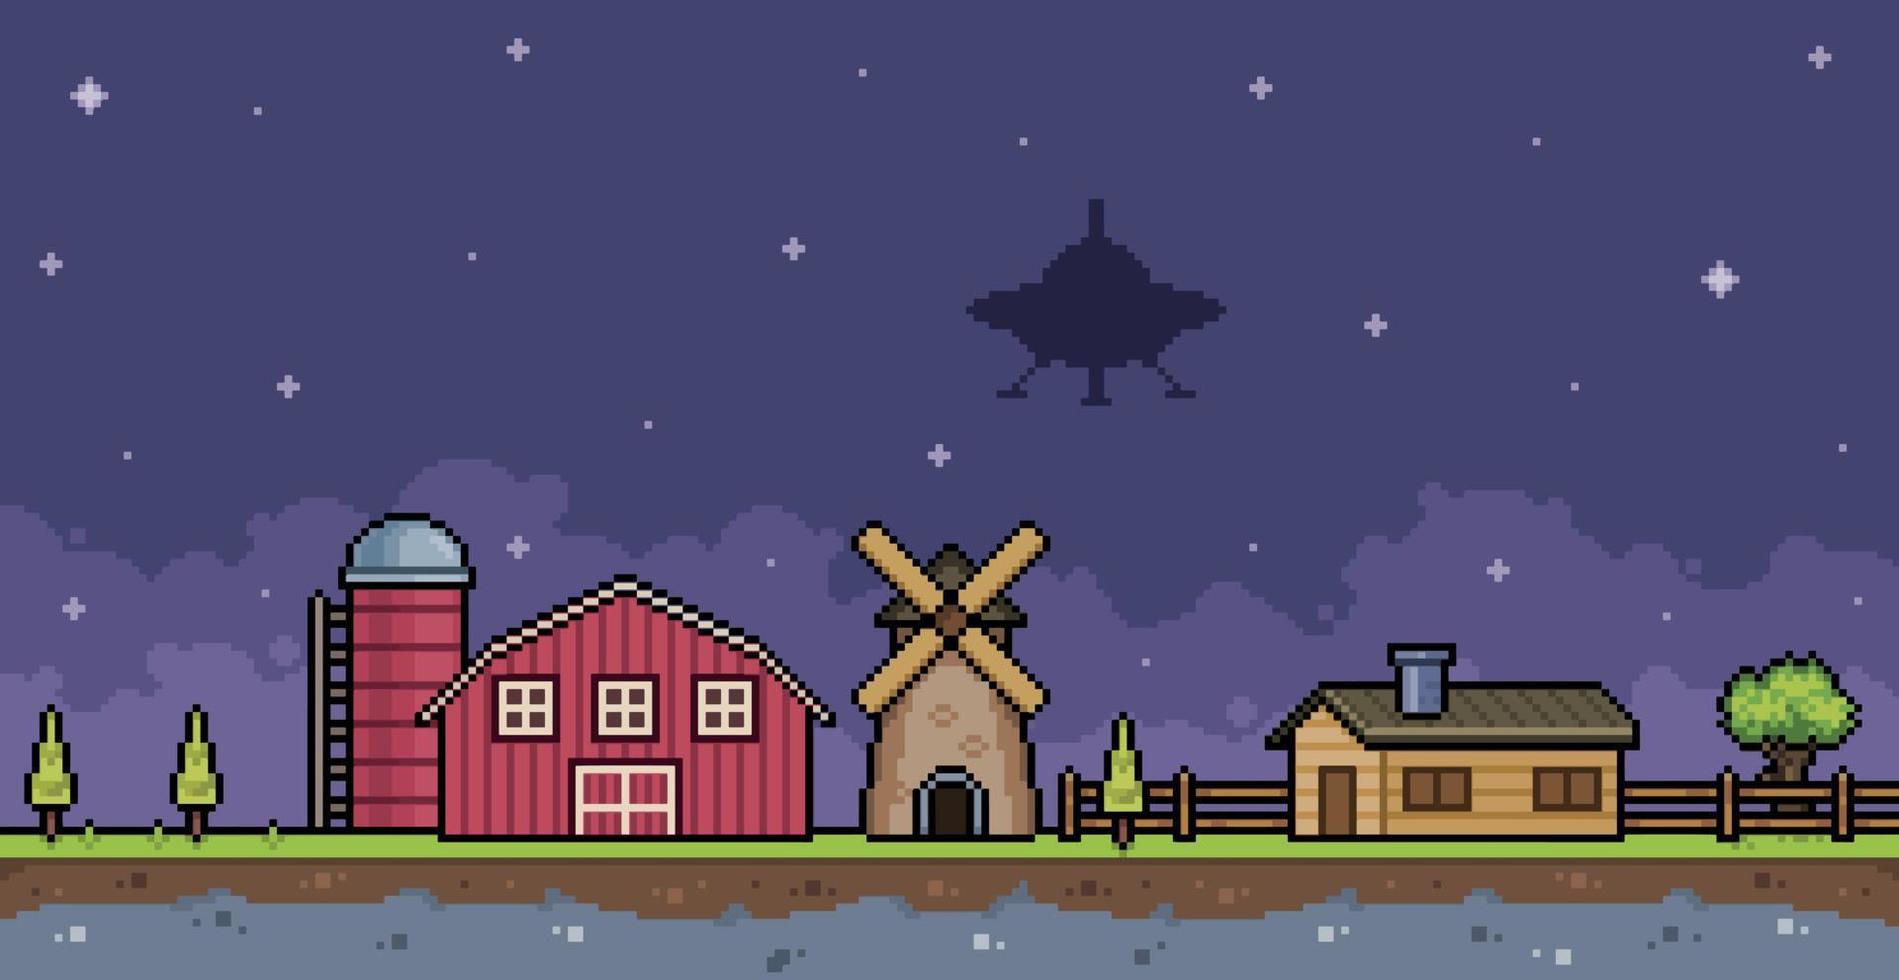 Pixel art UFO on farm with house, barn, silo, mill and flying saucer 8bit game background vector